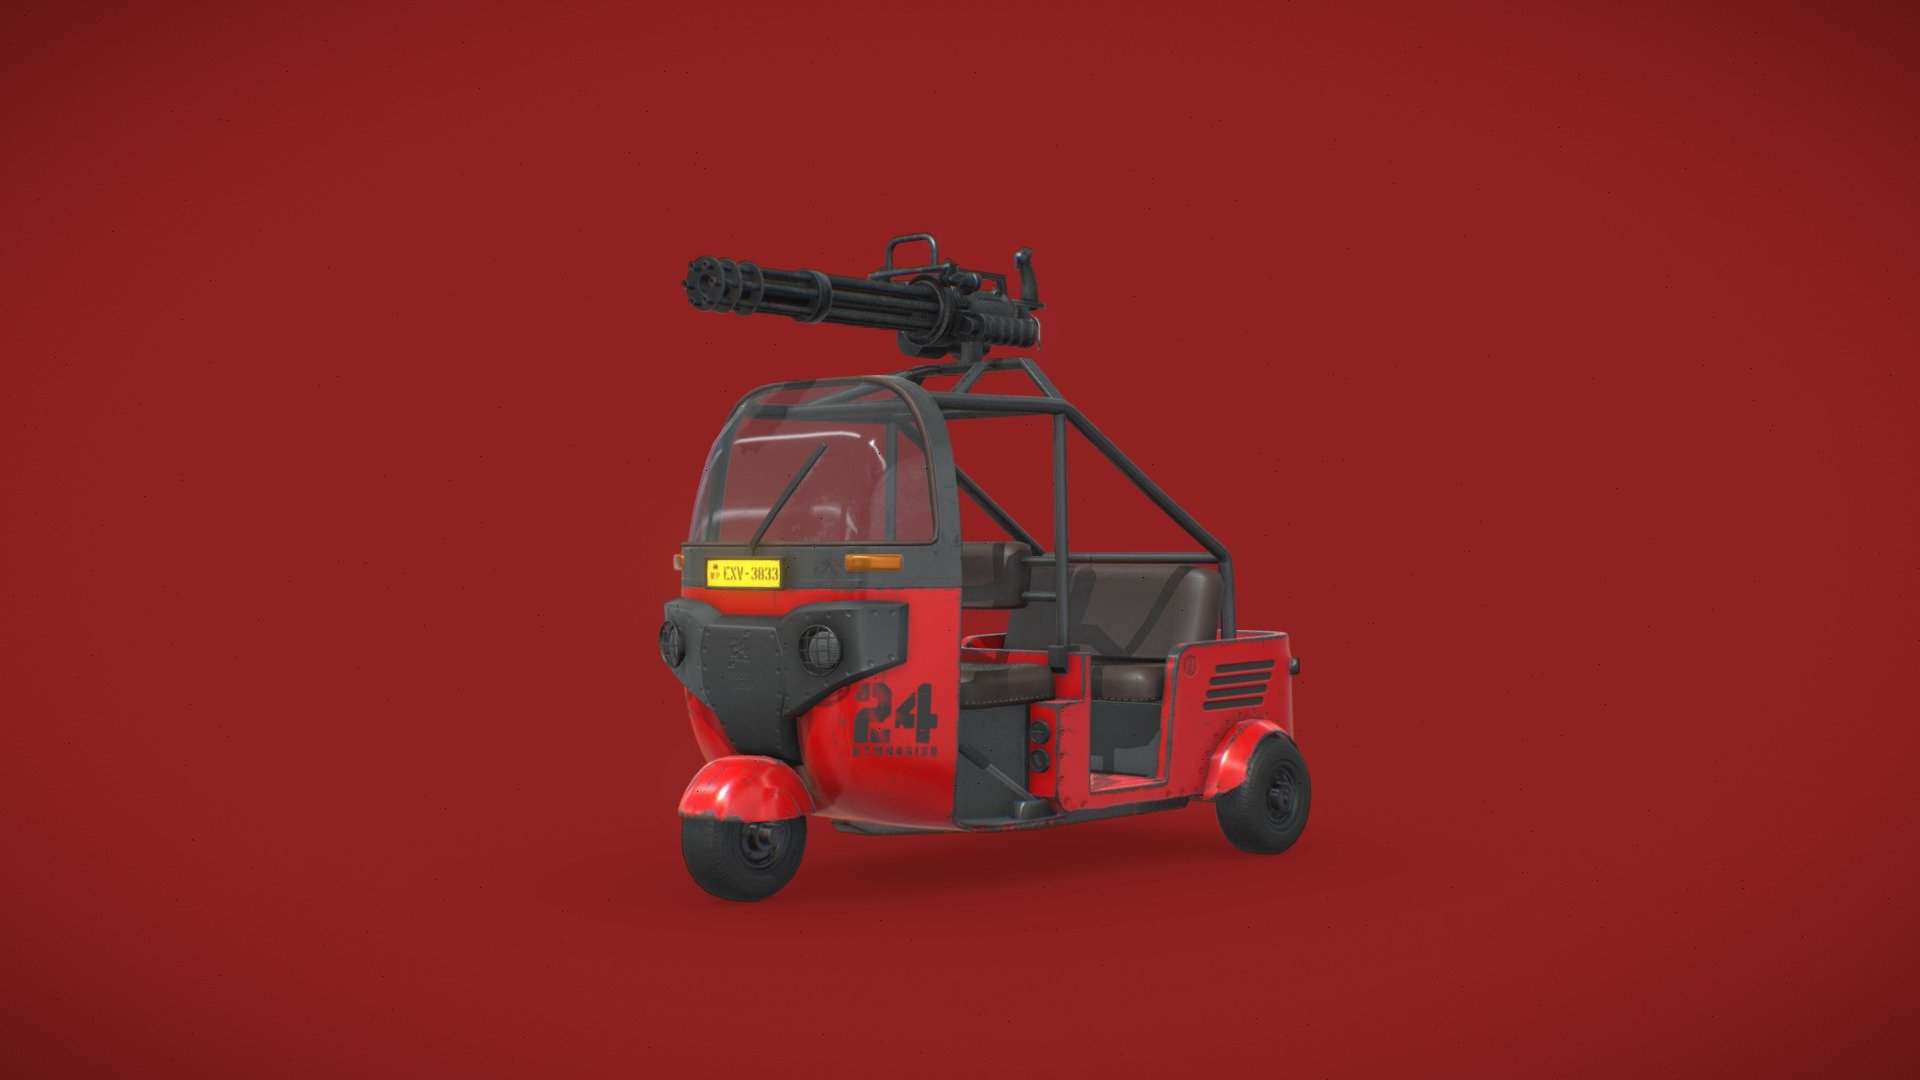 Tuk Tuk is an auto rickshaw motorized version of the pulled rickshaw or cycle rickshaw. Most have three wheels and do not tilt.
Attached is some mini machine gun stuff on the top. Made some knobby tires and a crash bar look to get a rigid look 3d model